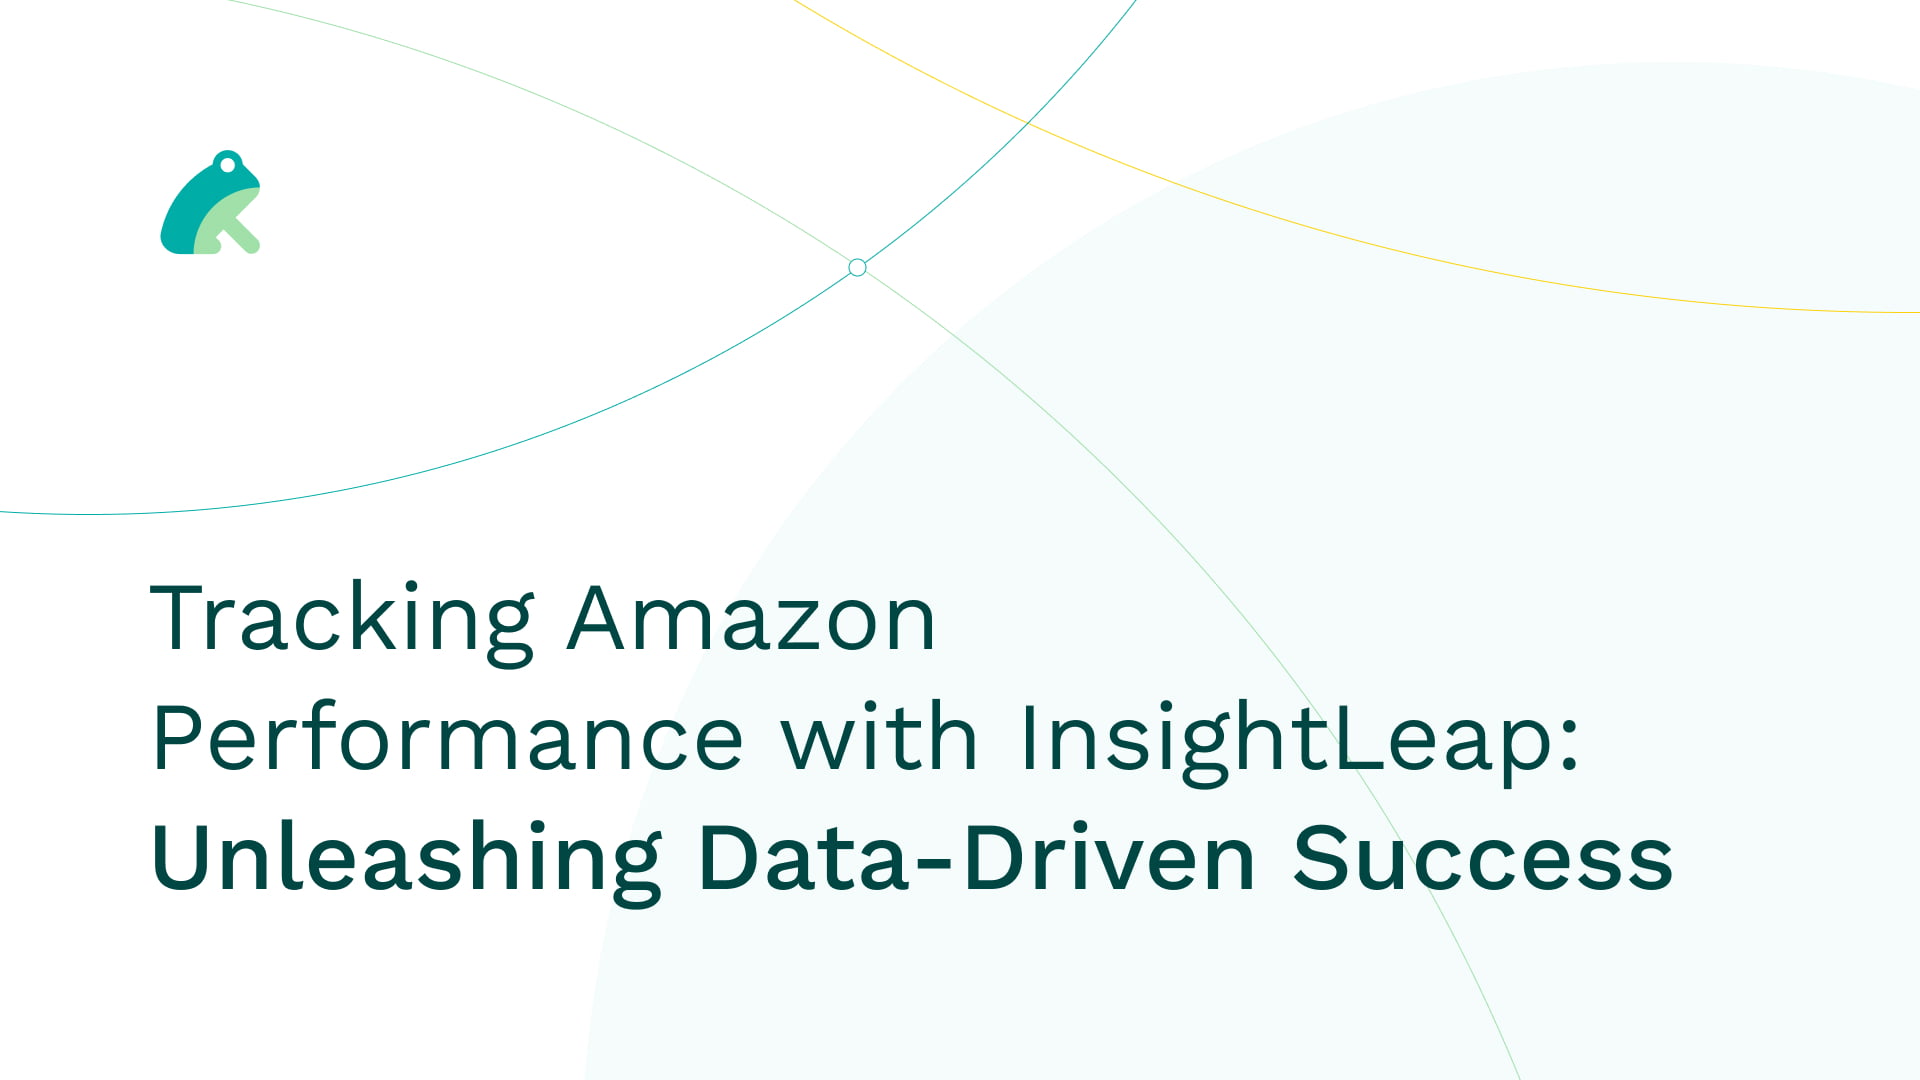 Tracking Amazon Performance with InsightLeap: Unleashing Data-Driven Success